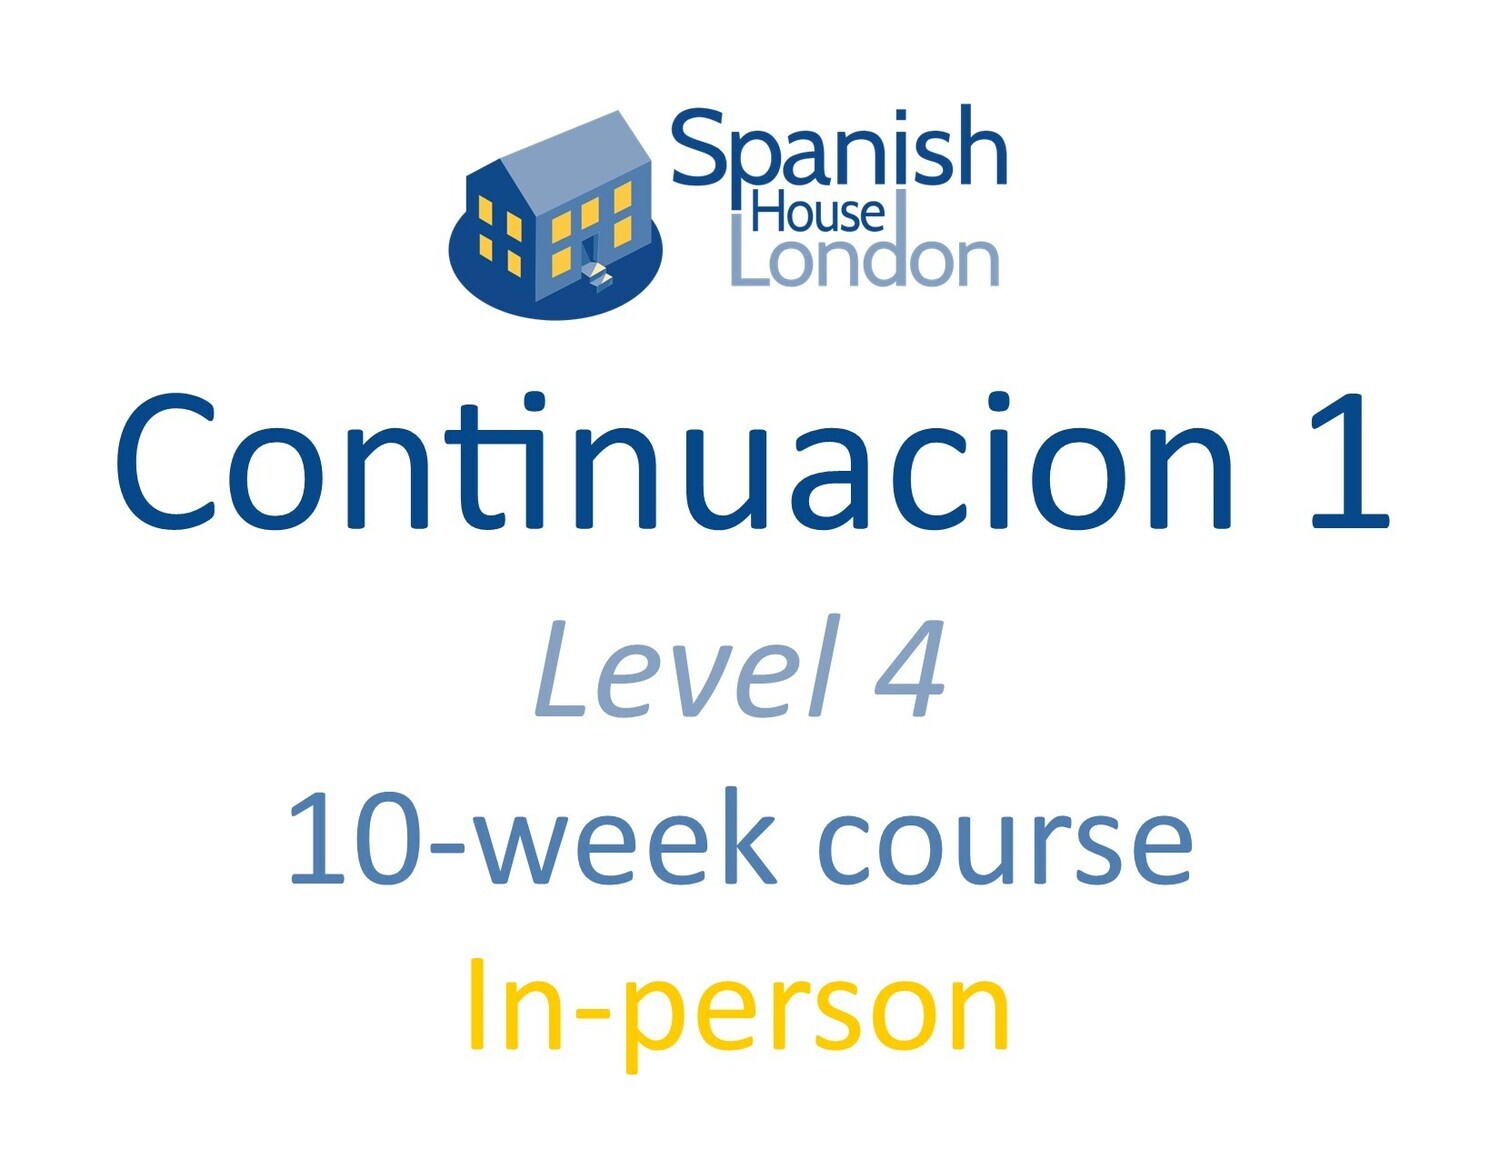 Continuacion 1 Course starting on 29th June at 6pm in Euston / King's Cross